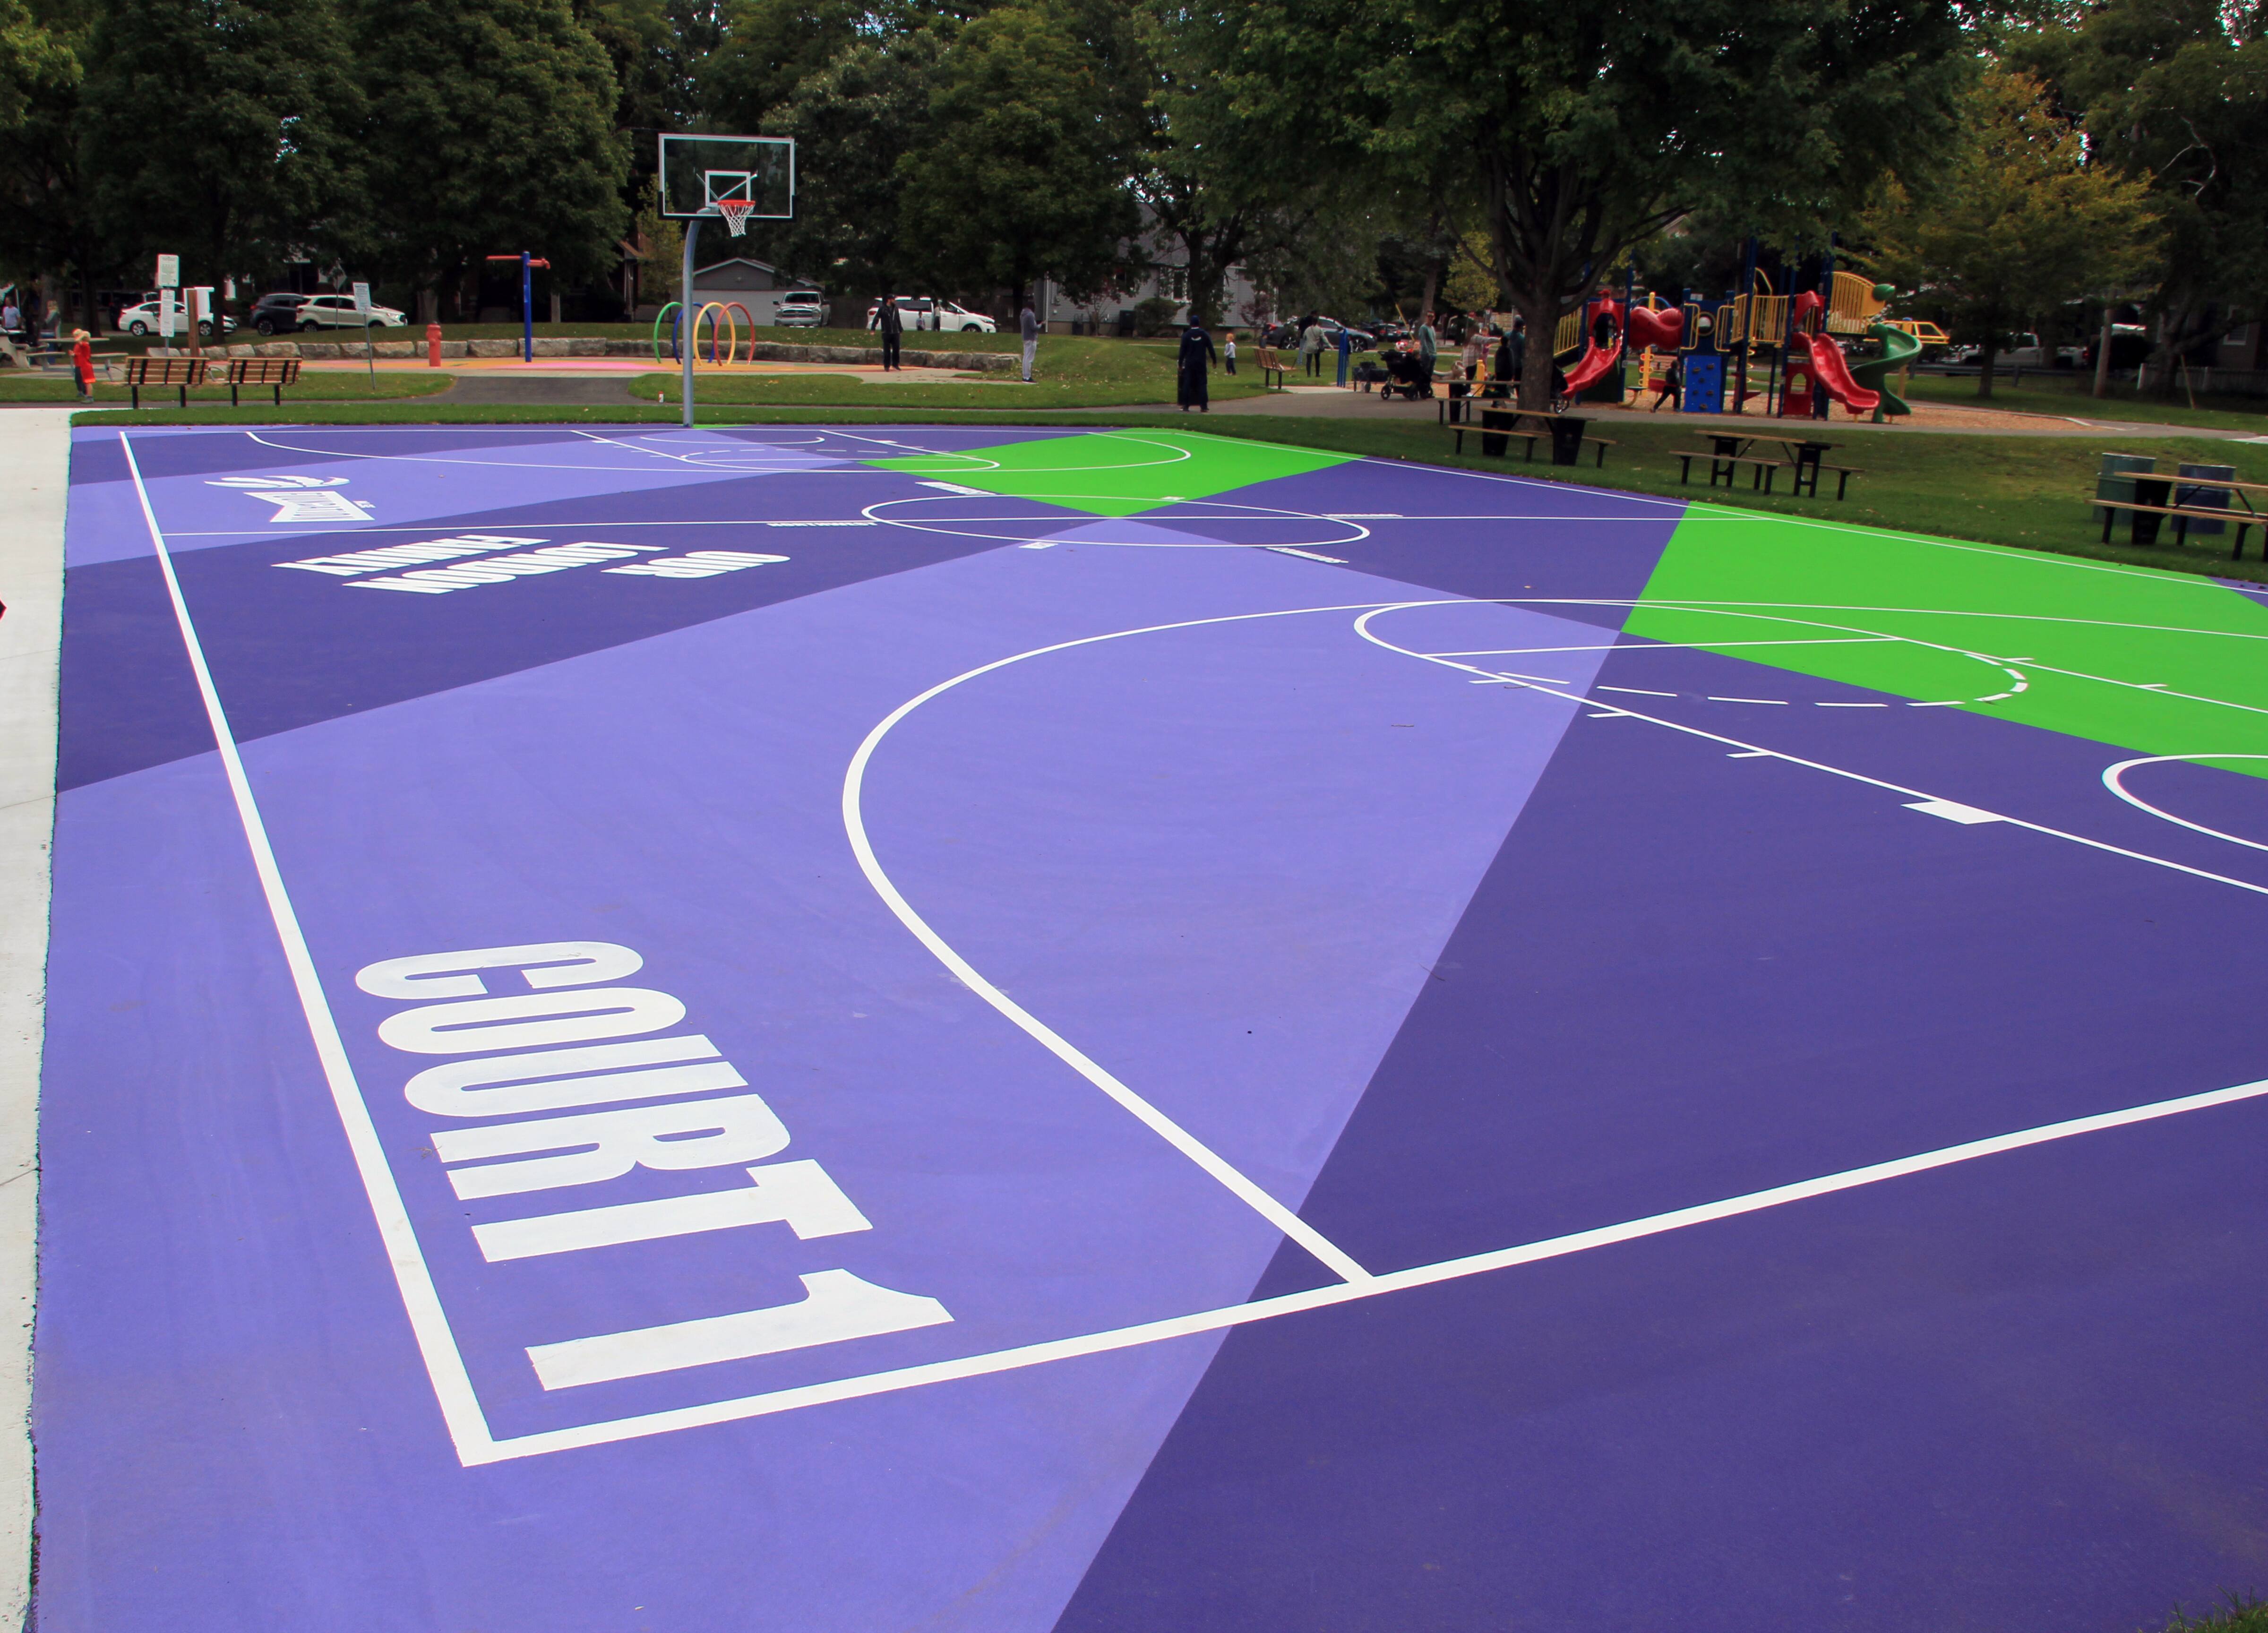 The upgraded basketball courts in West Lions Park and the purple and green court surface.